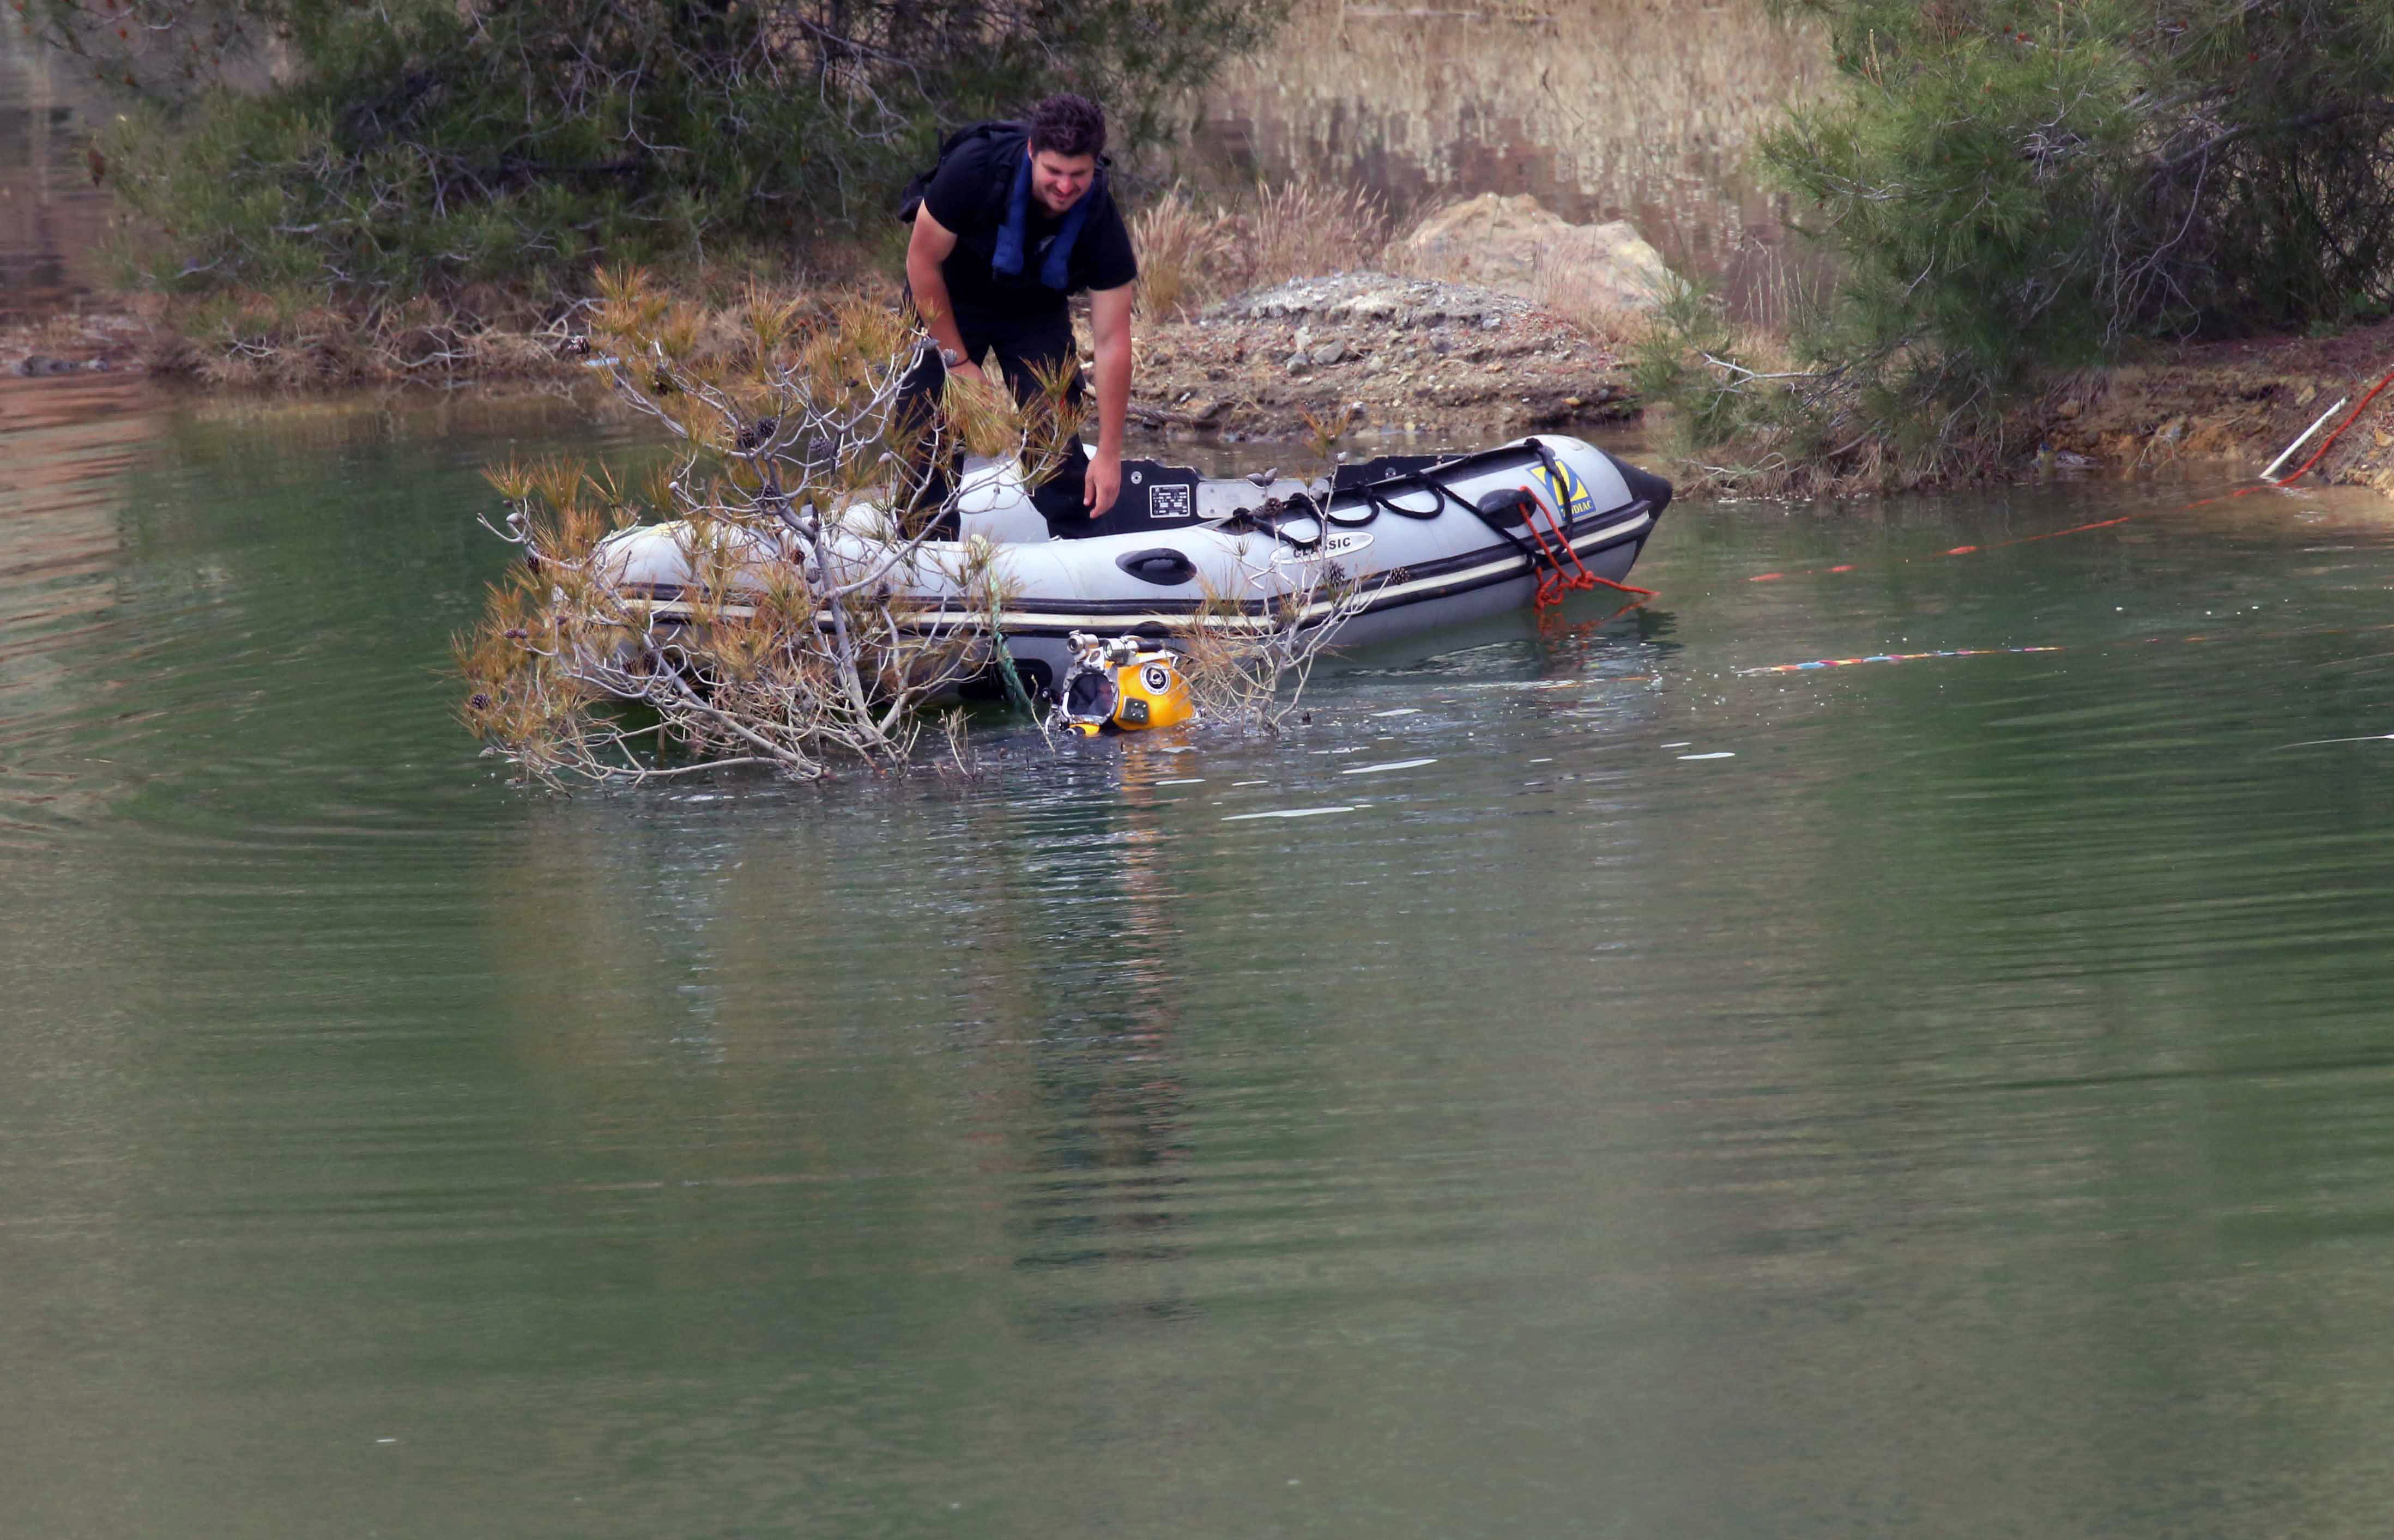 epa07530514 Firefighters and Investigators search the manmade lake near the village of Xiliato for the remains of more victims outside the Nicosia, Cyprus, 26 April 2019. Cyprus police is intensifying a search for the remains of more victims at locations where an army officer, who authorities say killed five women and two girls, had dumped their bodies.  EPA/KATIA CHRISTODOULOU